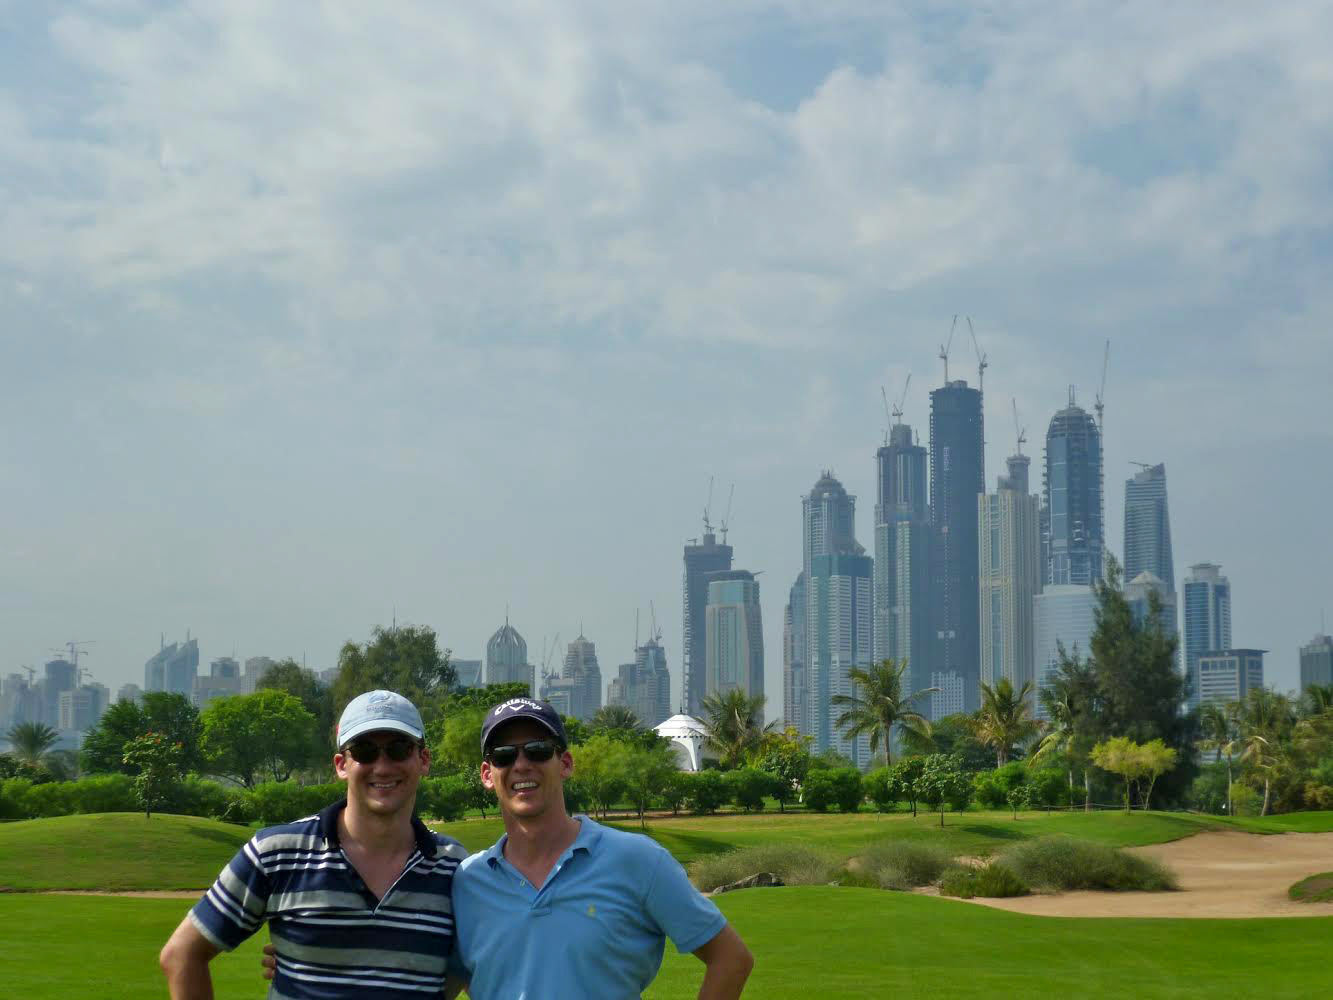 Us on the golf course with Dubai in the background